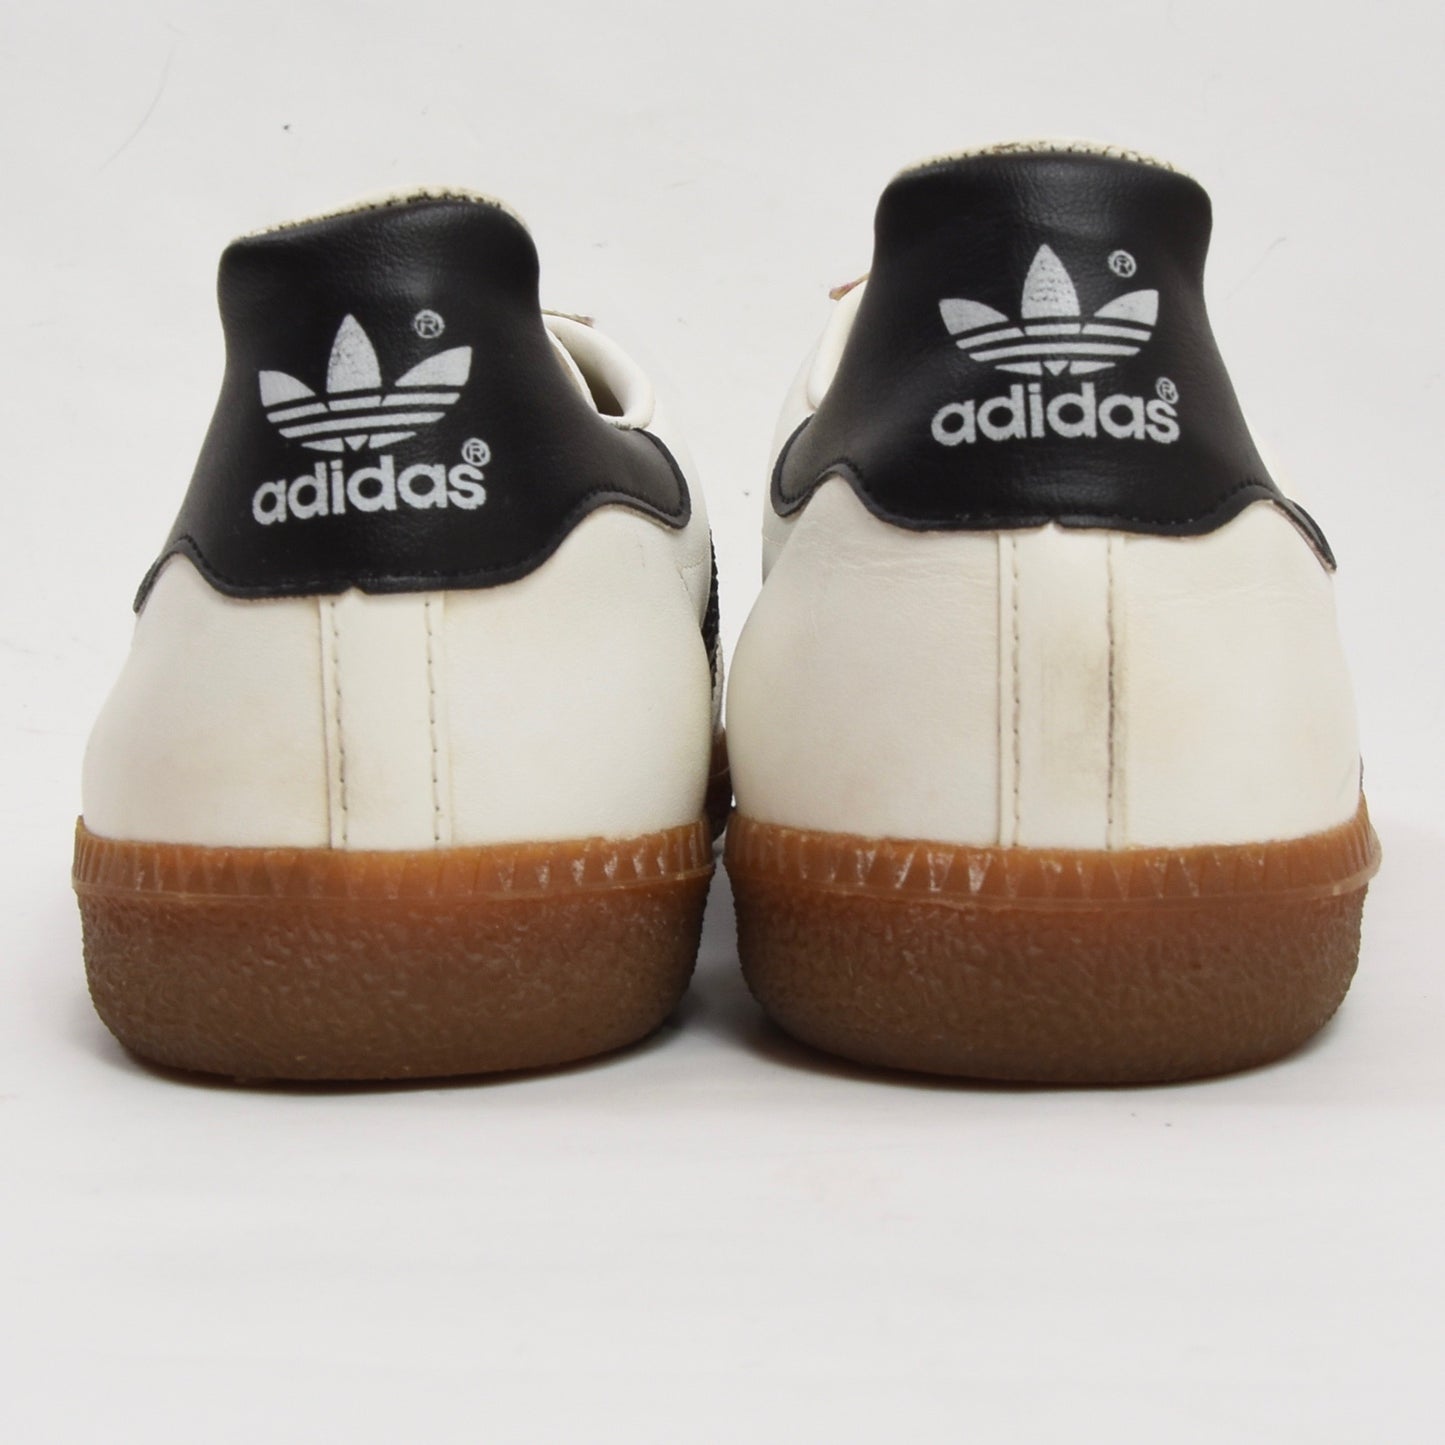 Vintage Adidas Universal Sneakers Made in West Germany Size 6.5 - White/Black